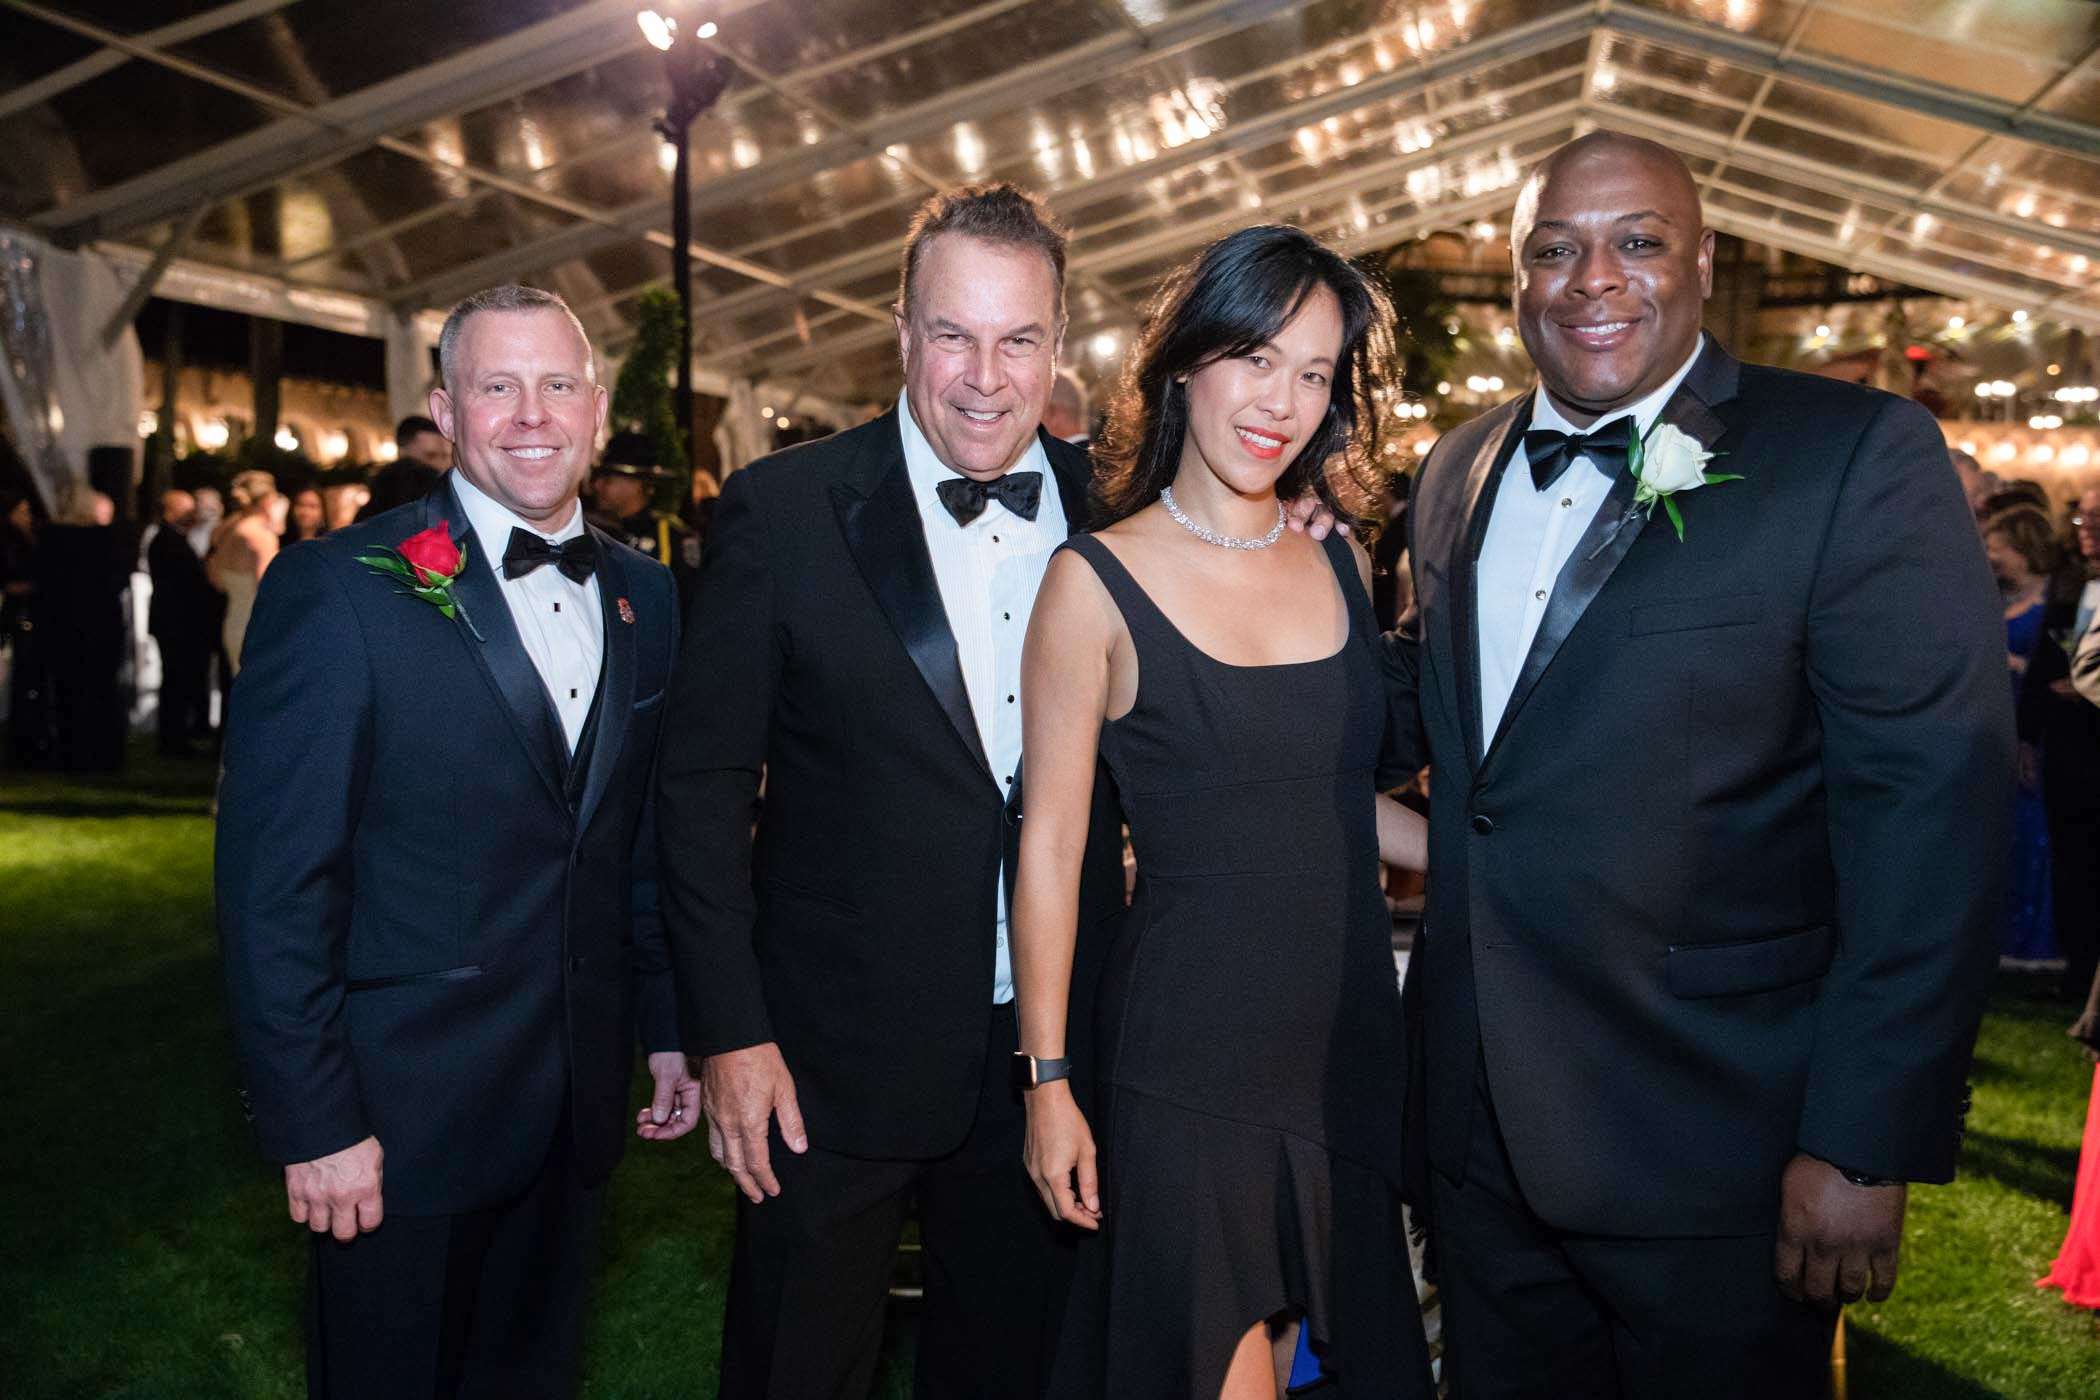 Urgent Call for Federal Investigation Into Town of Palm Beach Police: McWhorter Foundation Request Lt. Dan Wilkinson (Furthest Right) Billionaire (Jeff Greene) Donor Palm beach police and fire foundation.